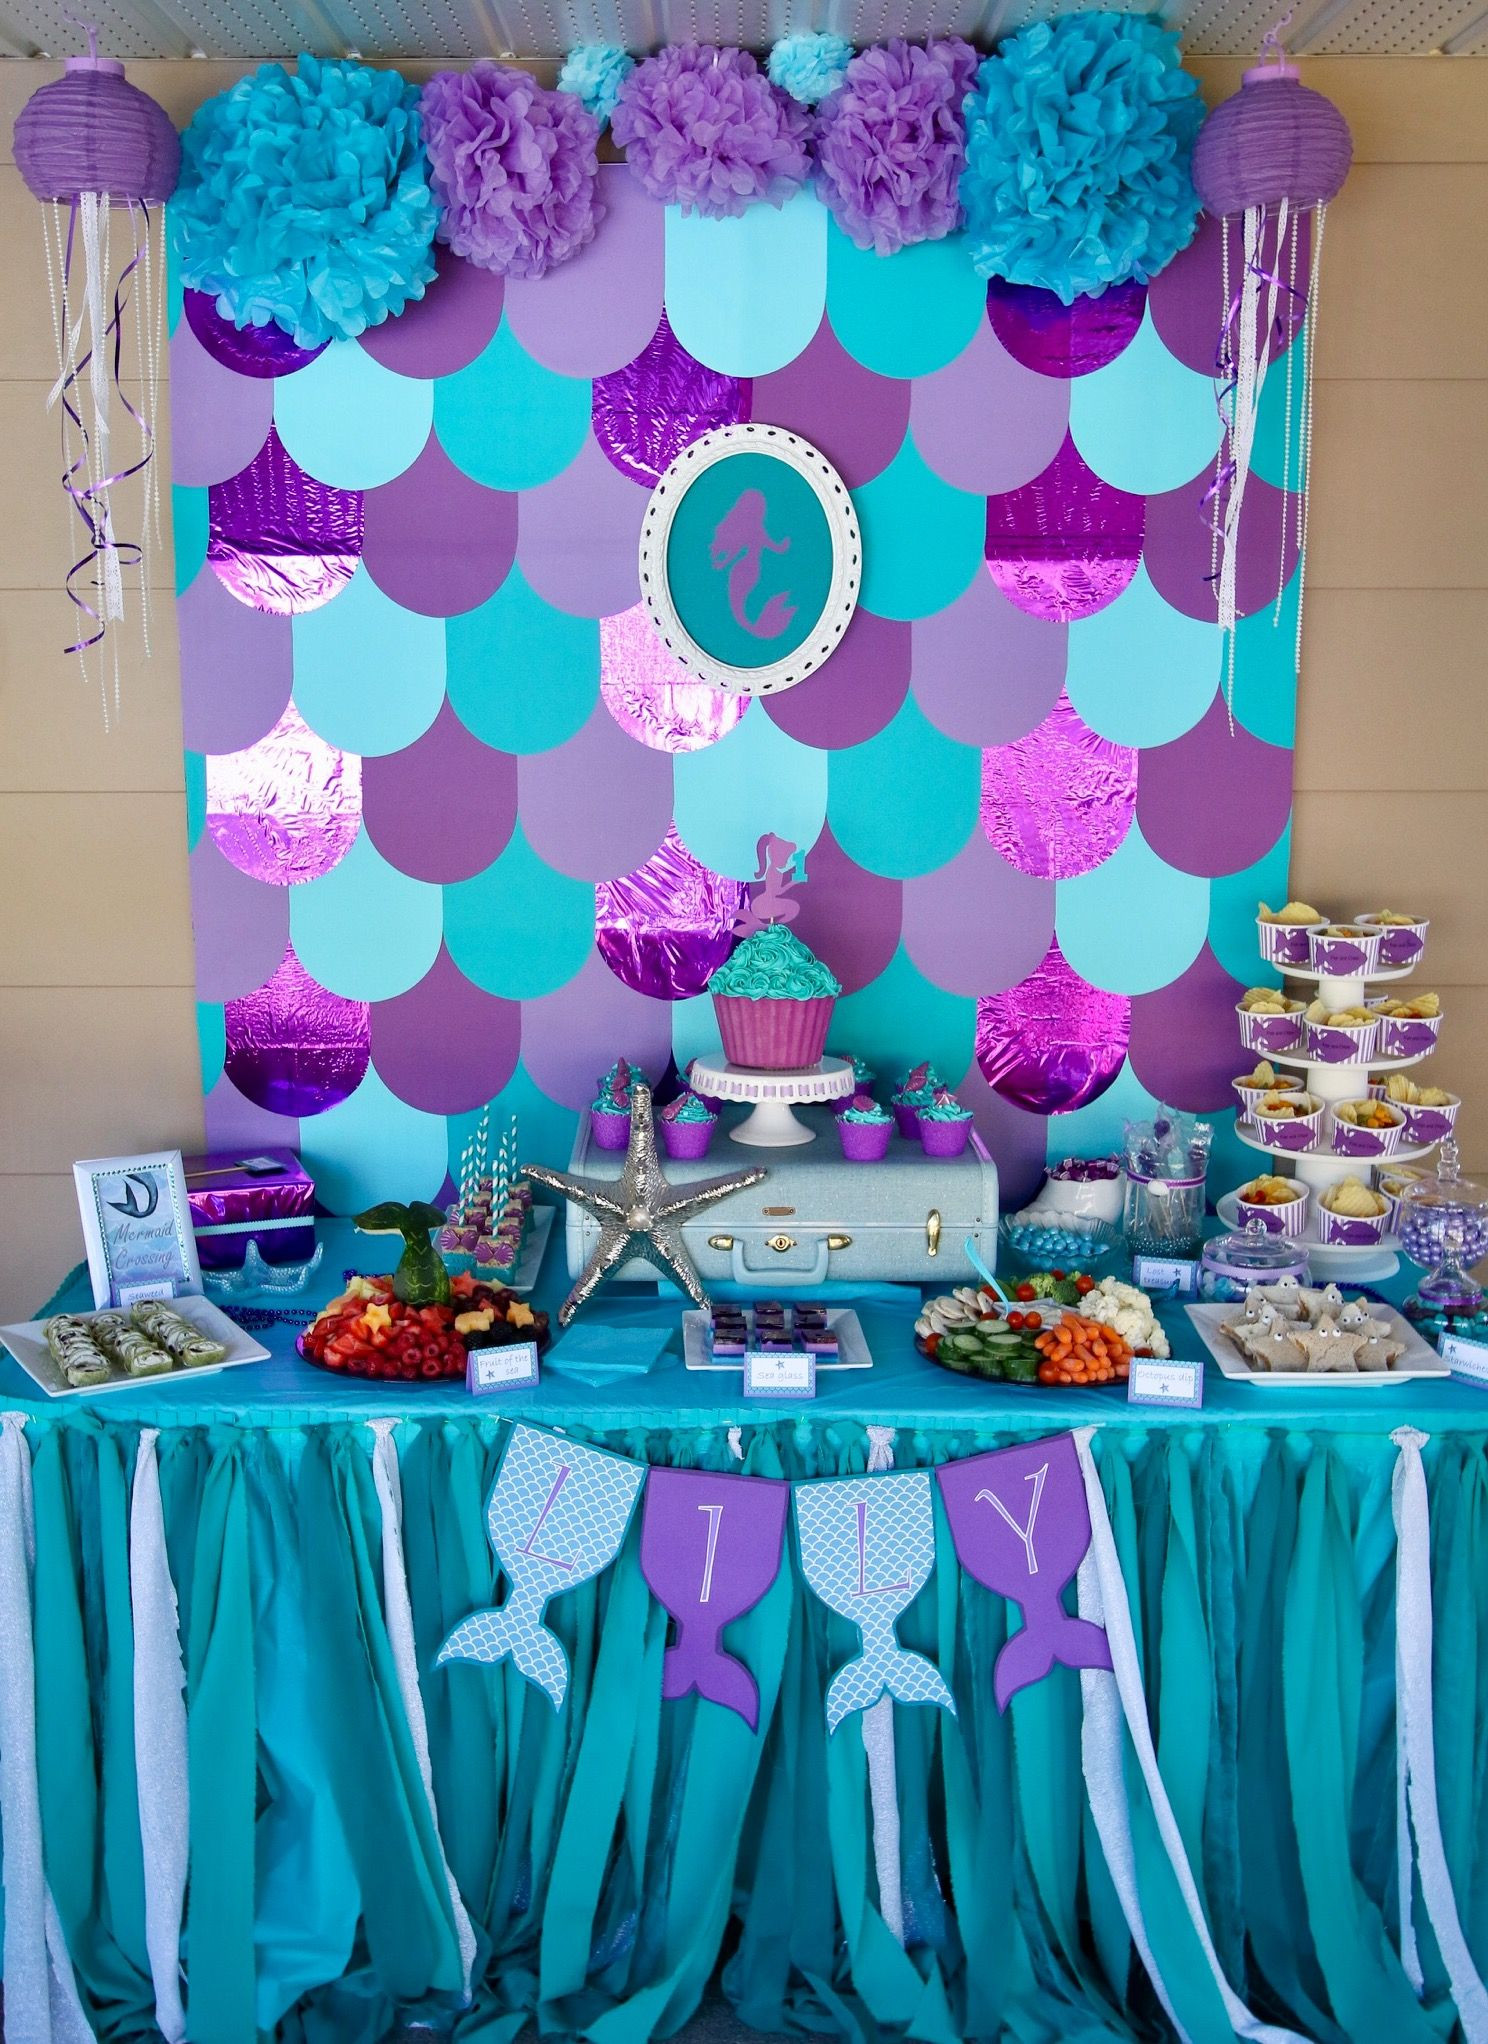 Mermaid Under The Sea Party Ideas
 Mermaid party table decorations Under the sea birthday